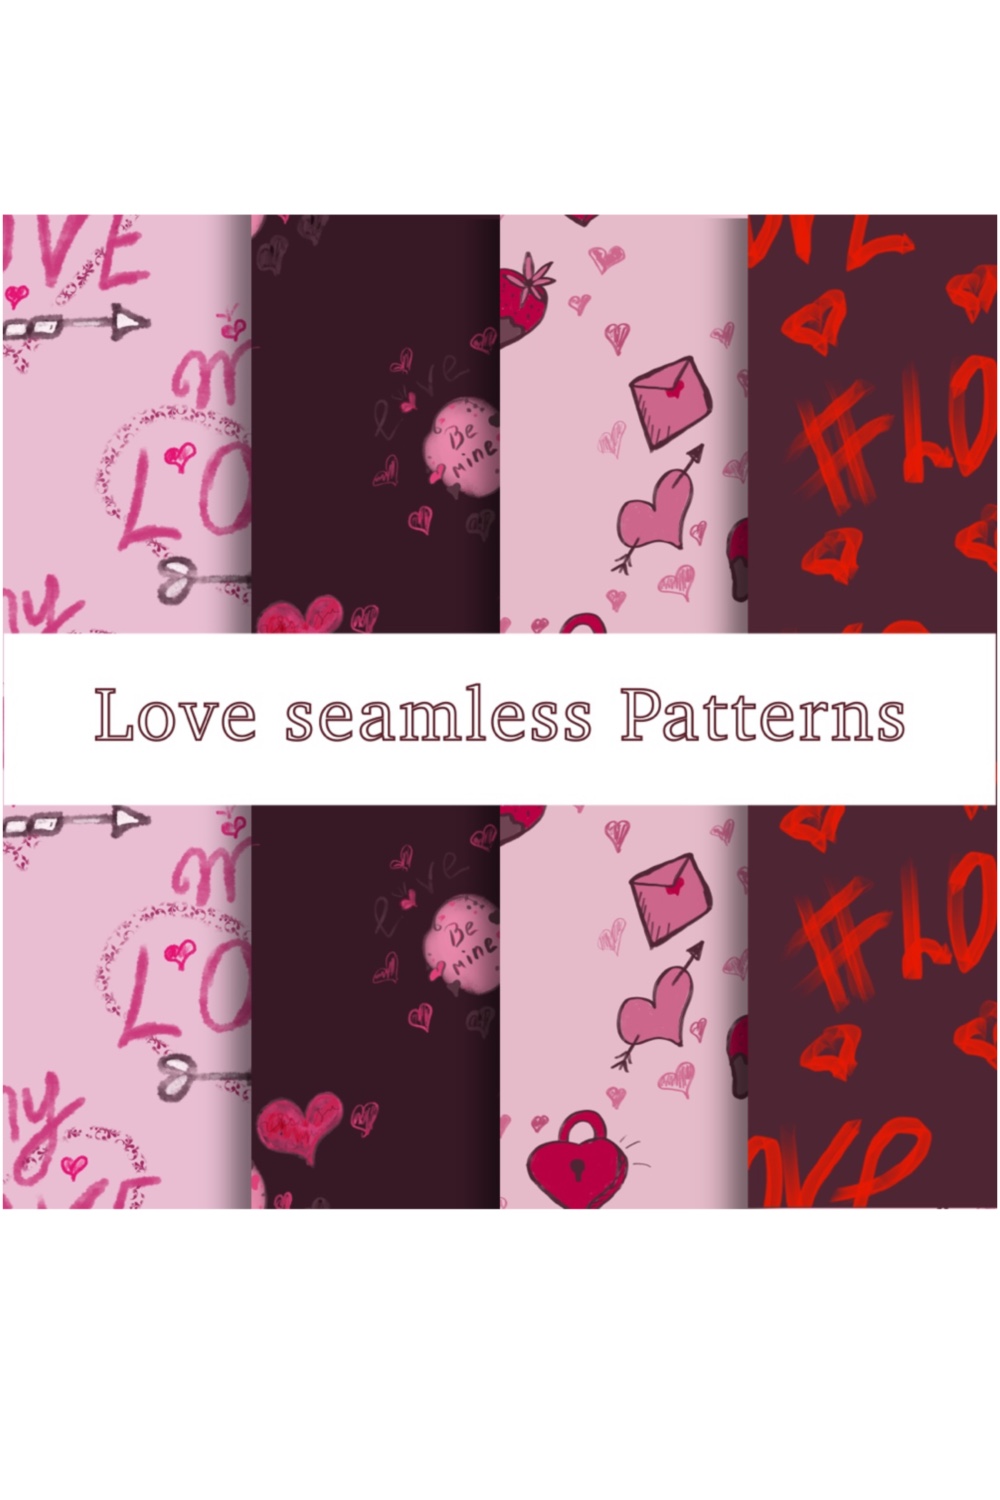 Love seamless patterns pinterest preview image.